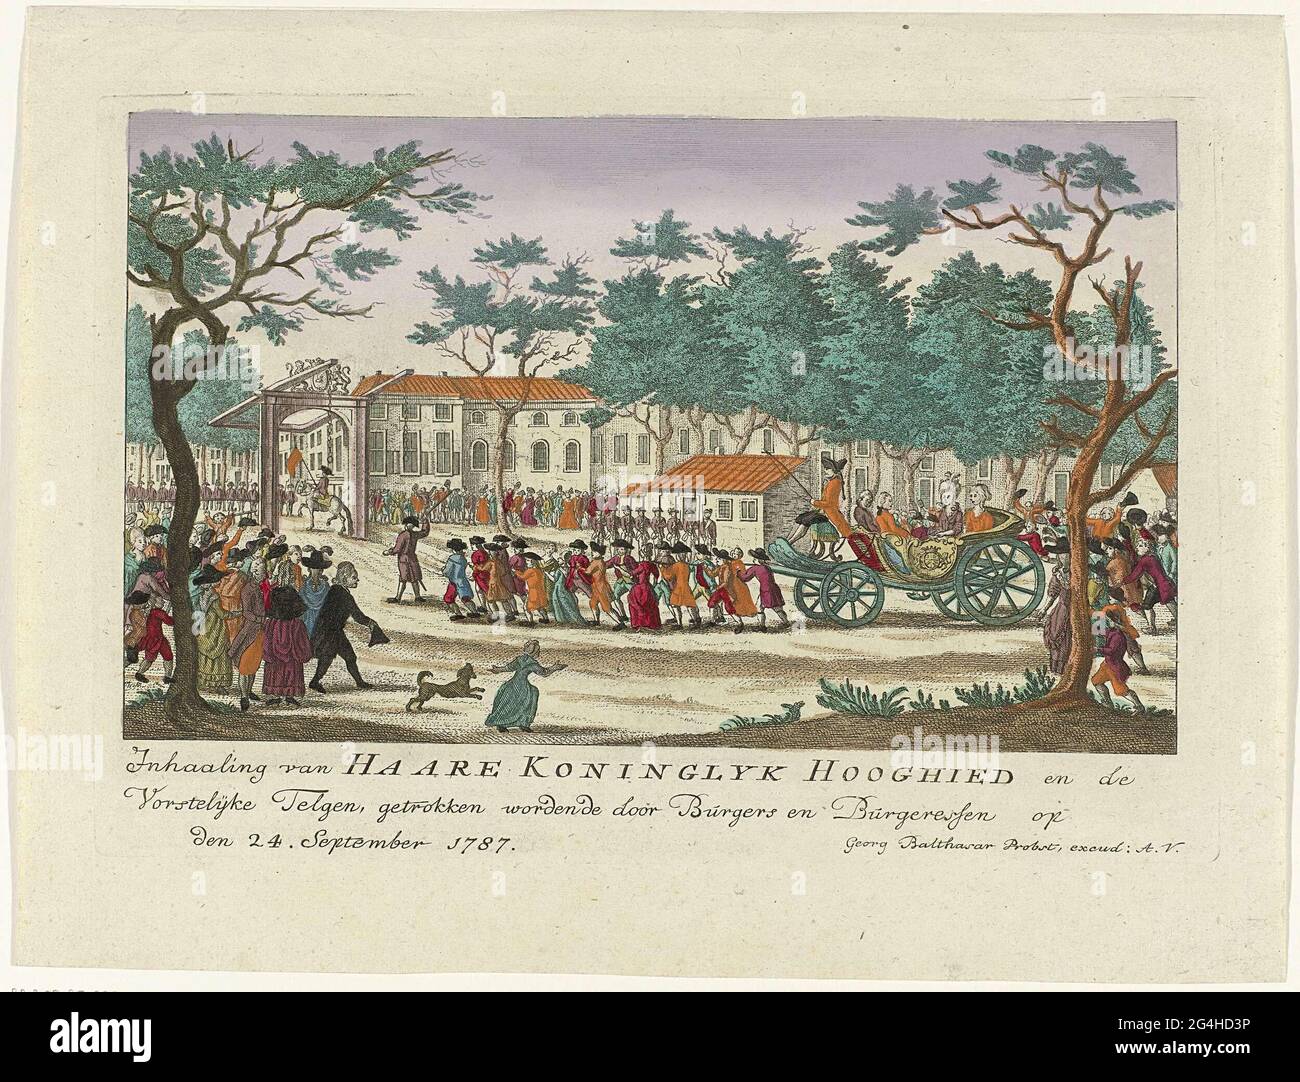 . Raying of the Princess of Orange and the children by the Burgerij in The Hague, 24 September 1787. The open carriage with the royal family is pulled by men and women over the road to the Bosch Bridge. Stock Photo